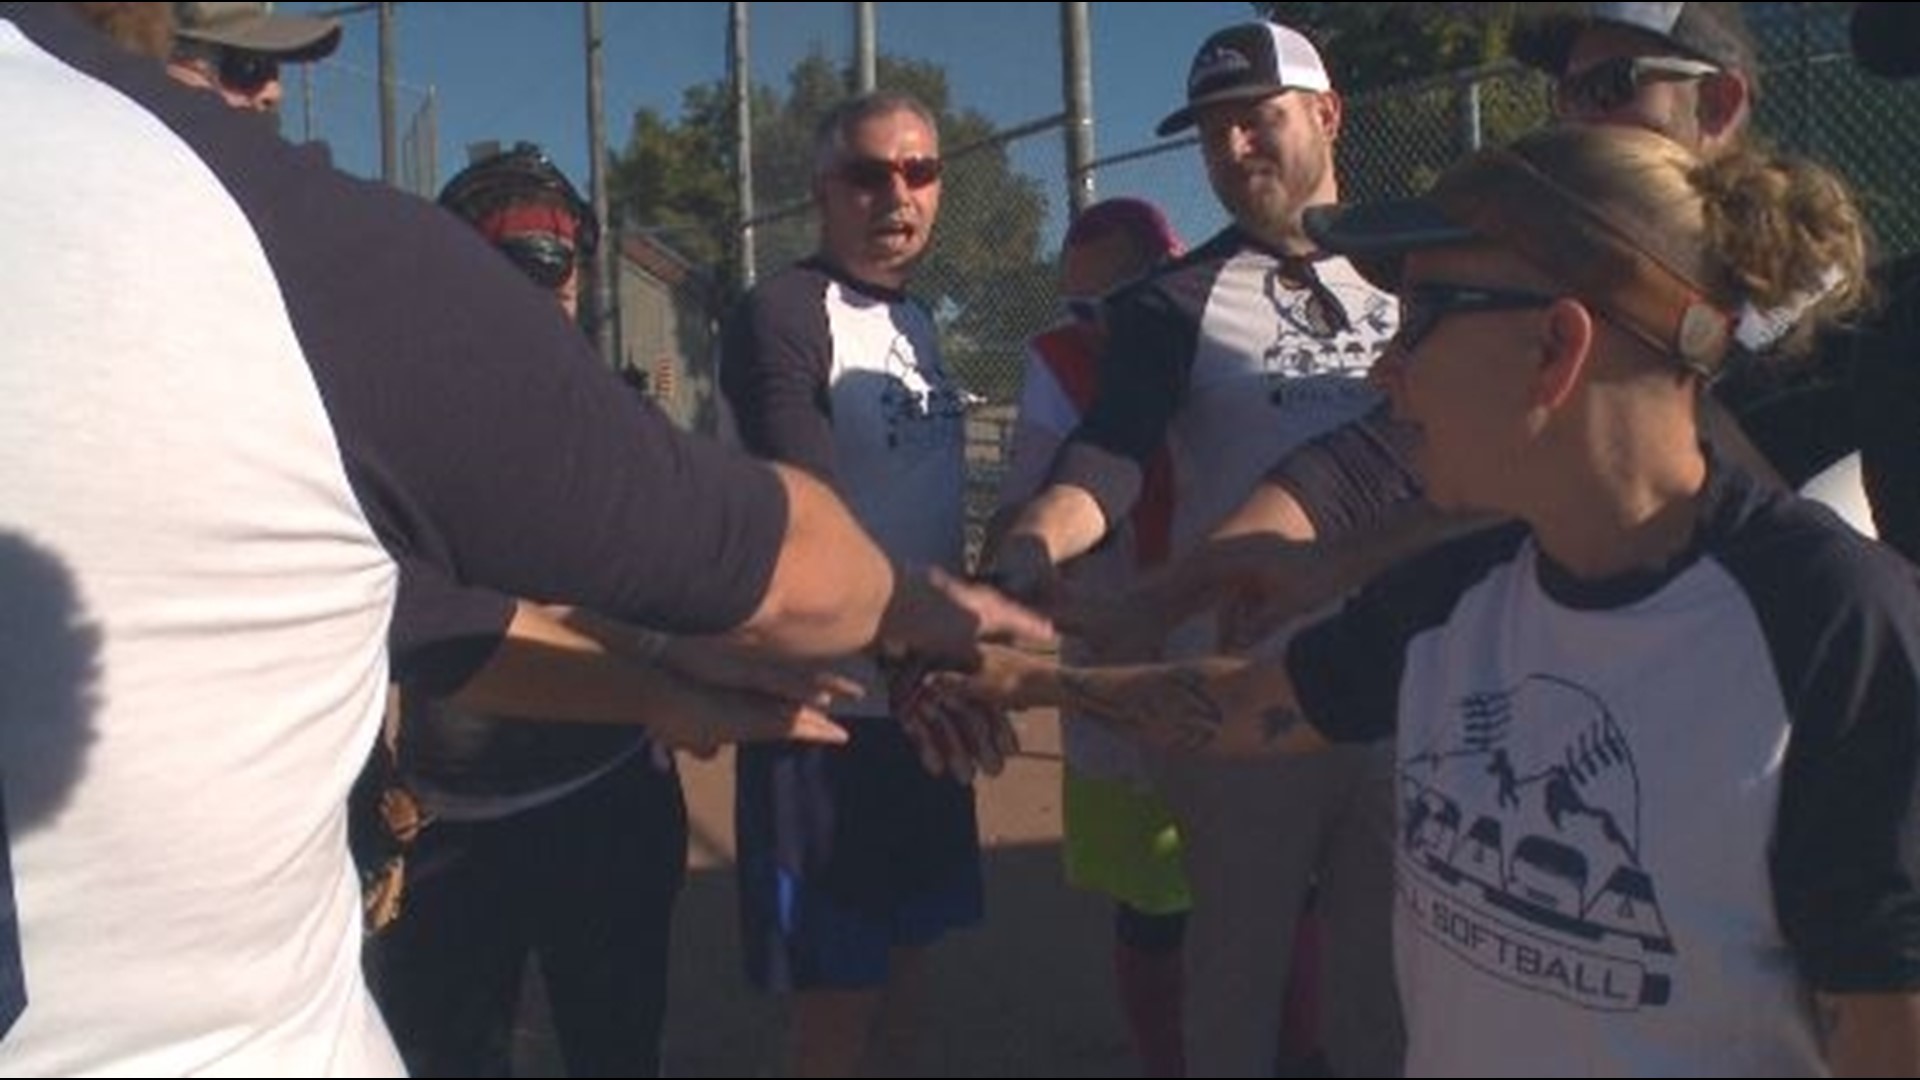 The Greater Denver Area Sports Association creates a competitive and welcoming atmosphere to the LGBTQ+ community for recreational softball, tennis, and golf.